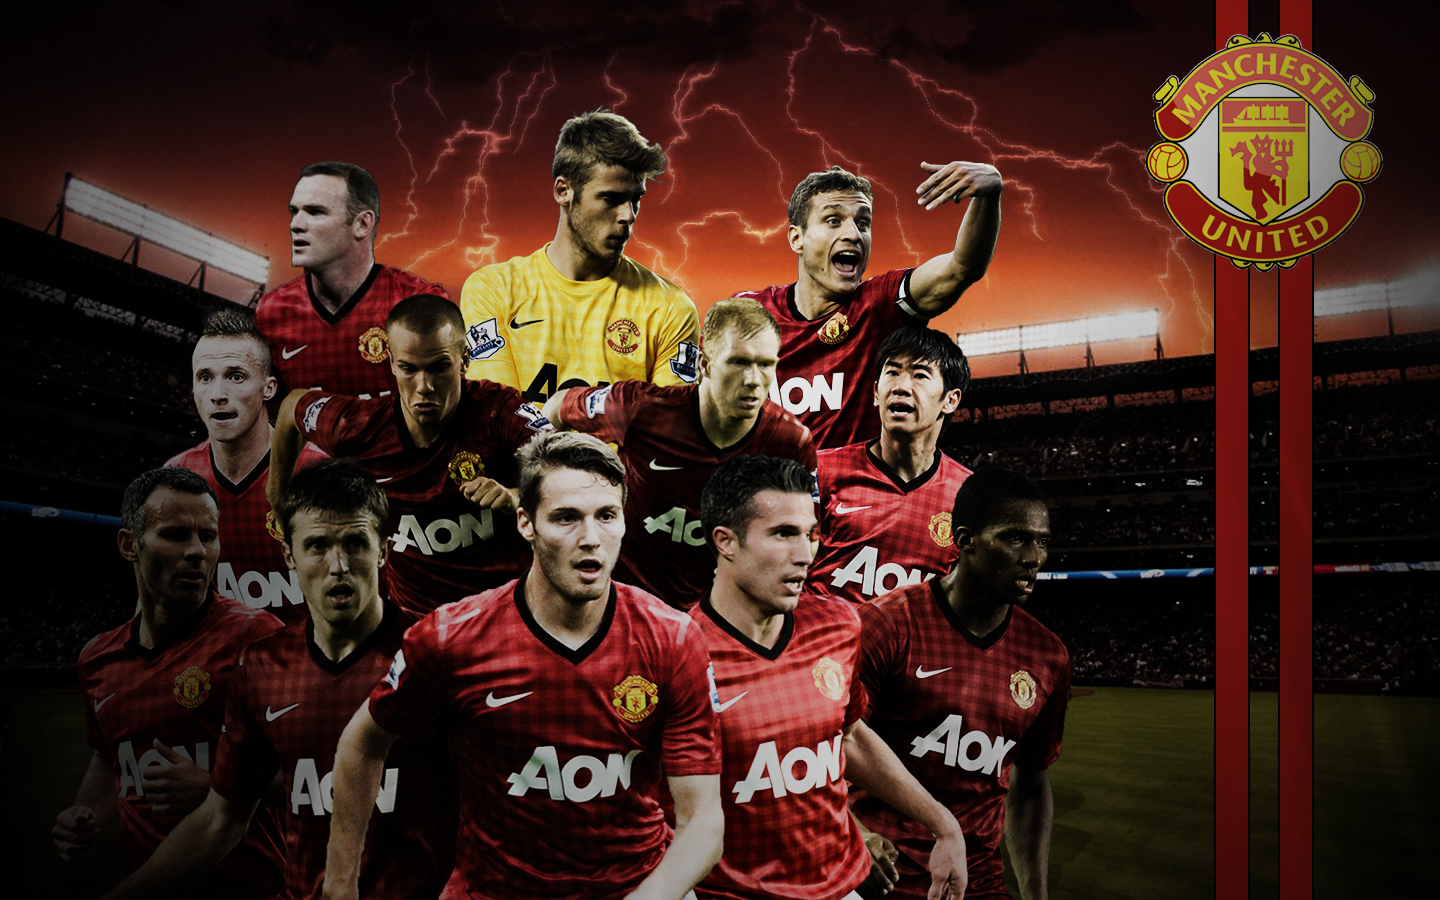 Manchester United Background Wallpaper Win10 Themes